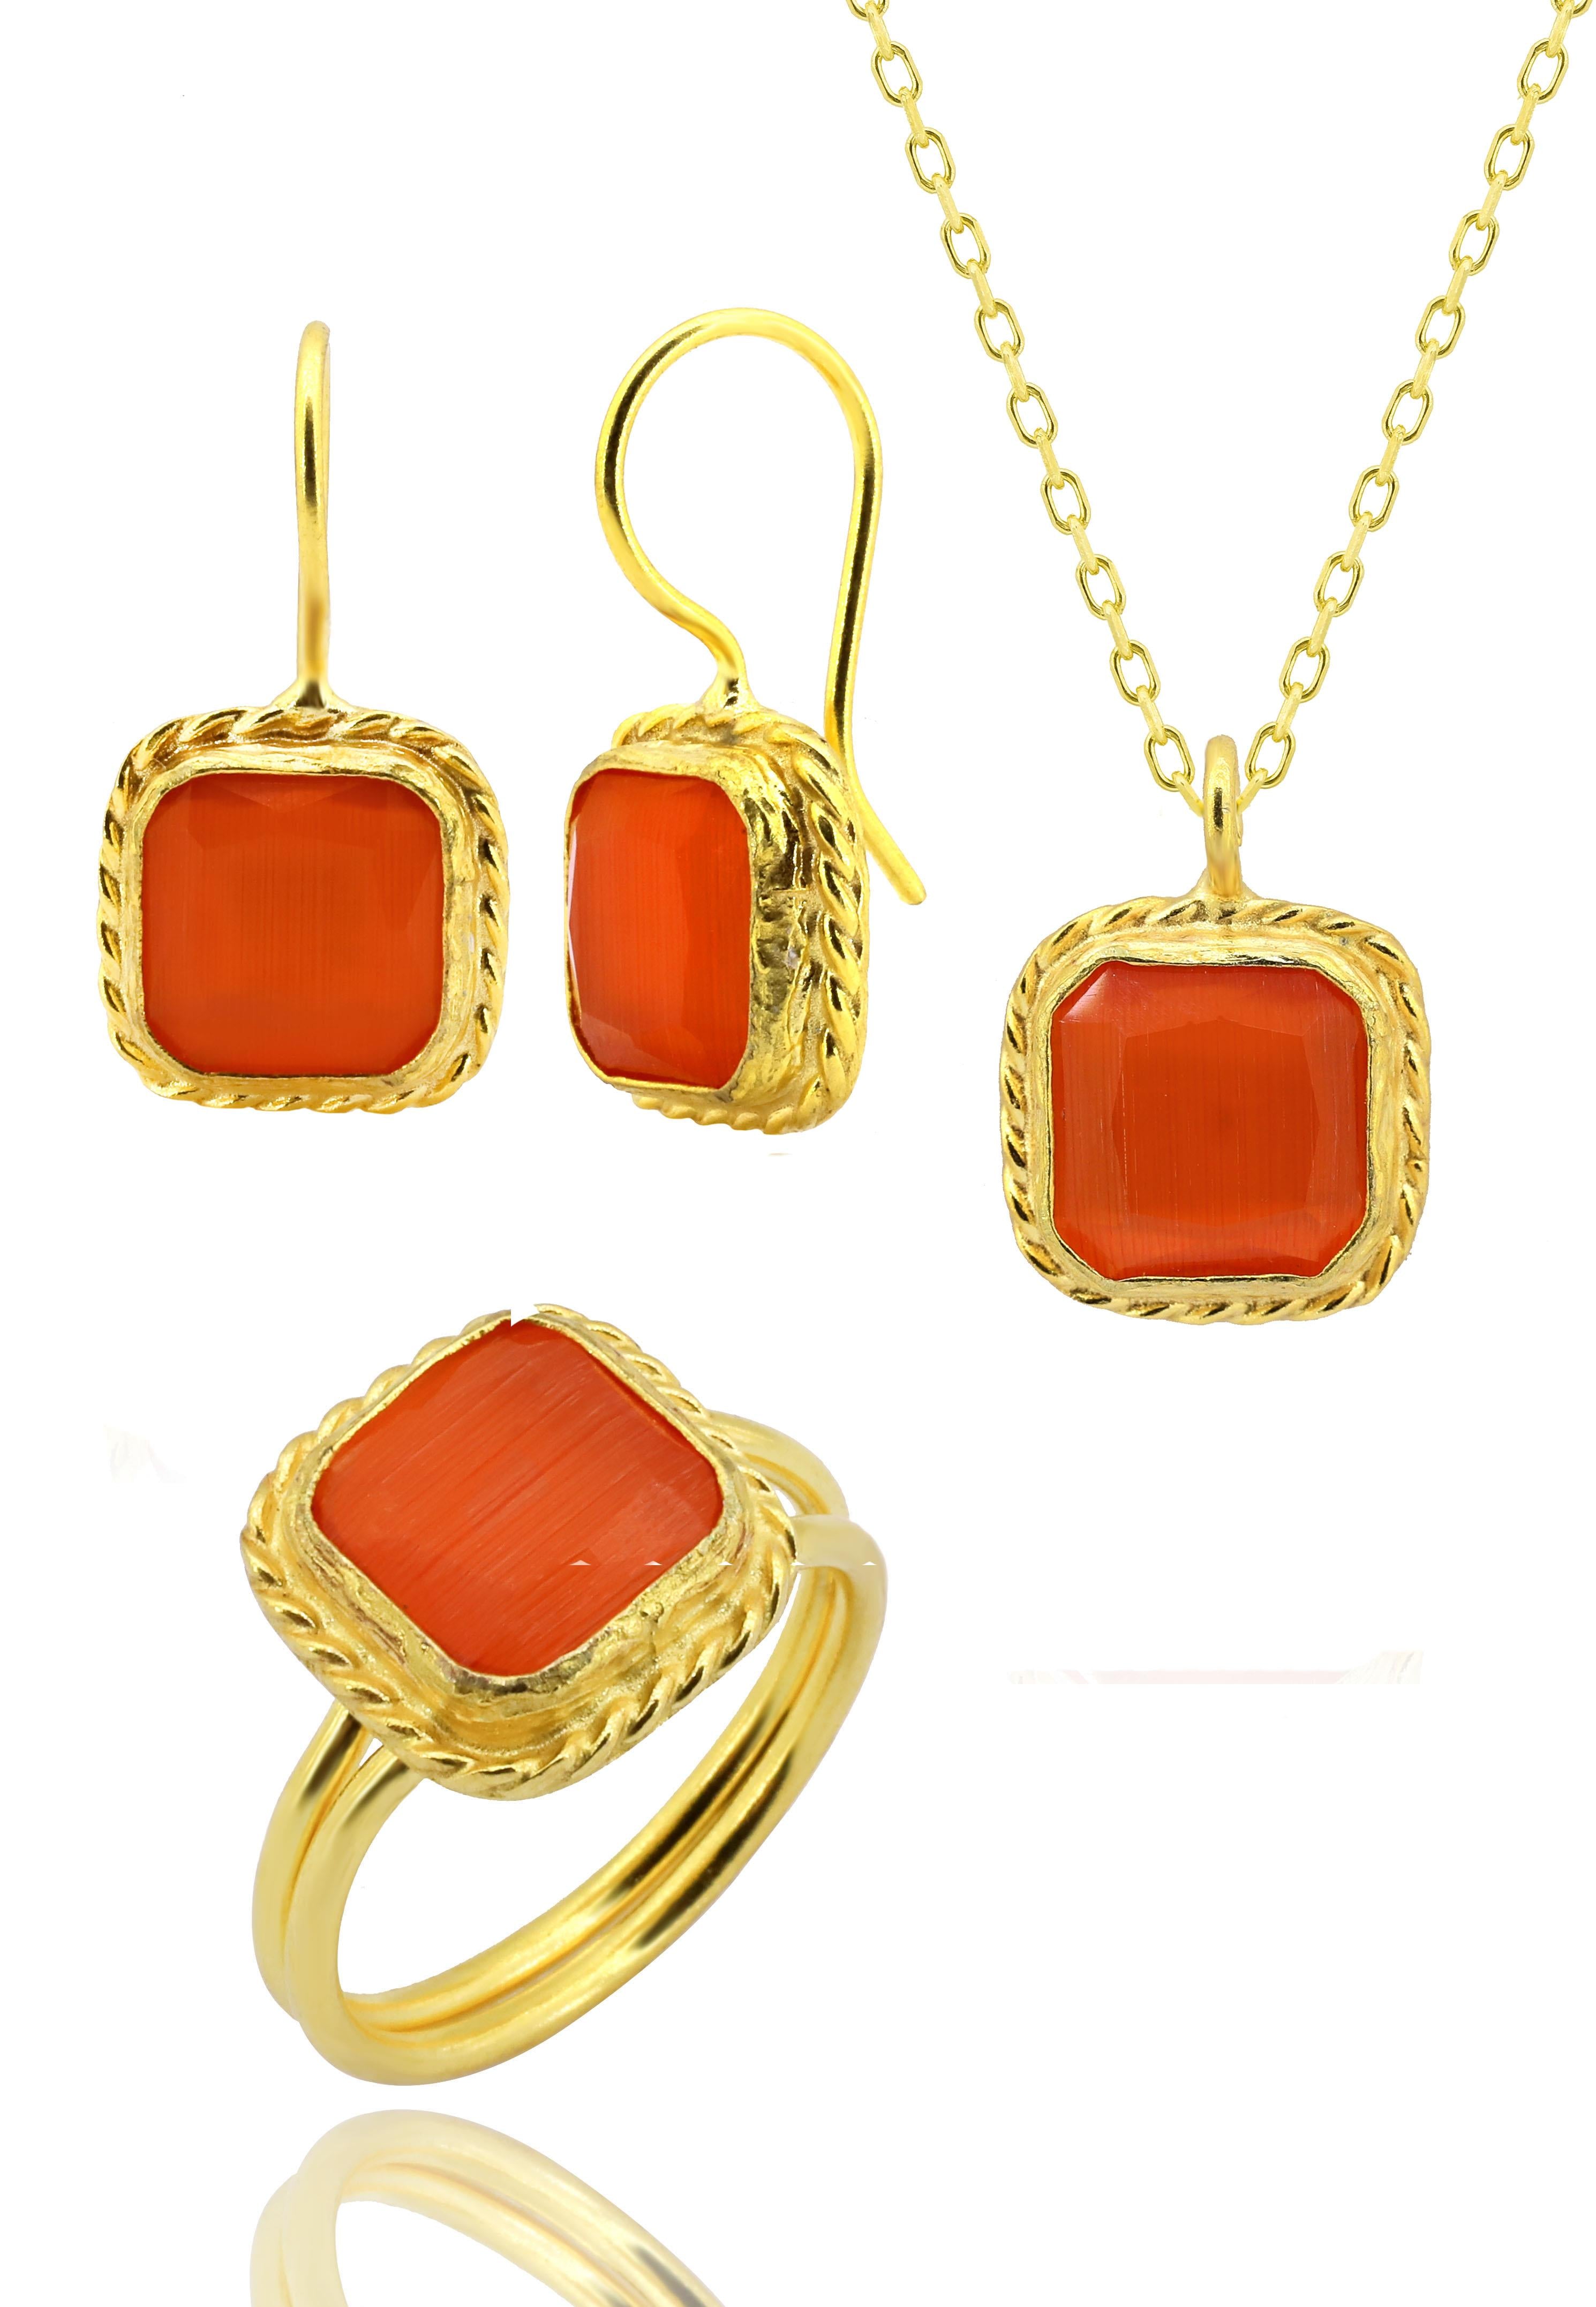 Sunstone Series: Orange Square-Cut Adjustable Ring, 22K Gold-Plated Women's Triple Set with 925 Sterling Silver Chains